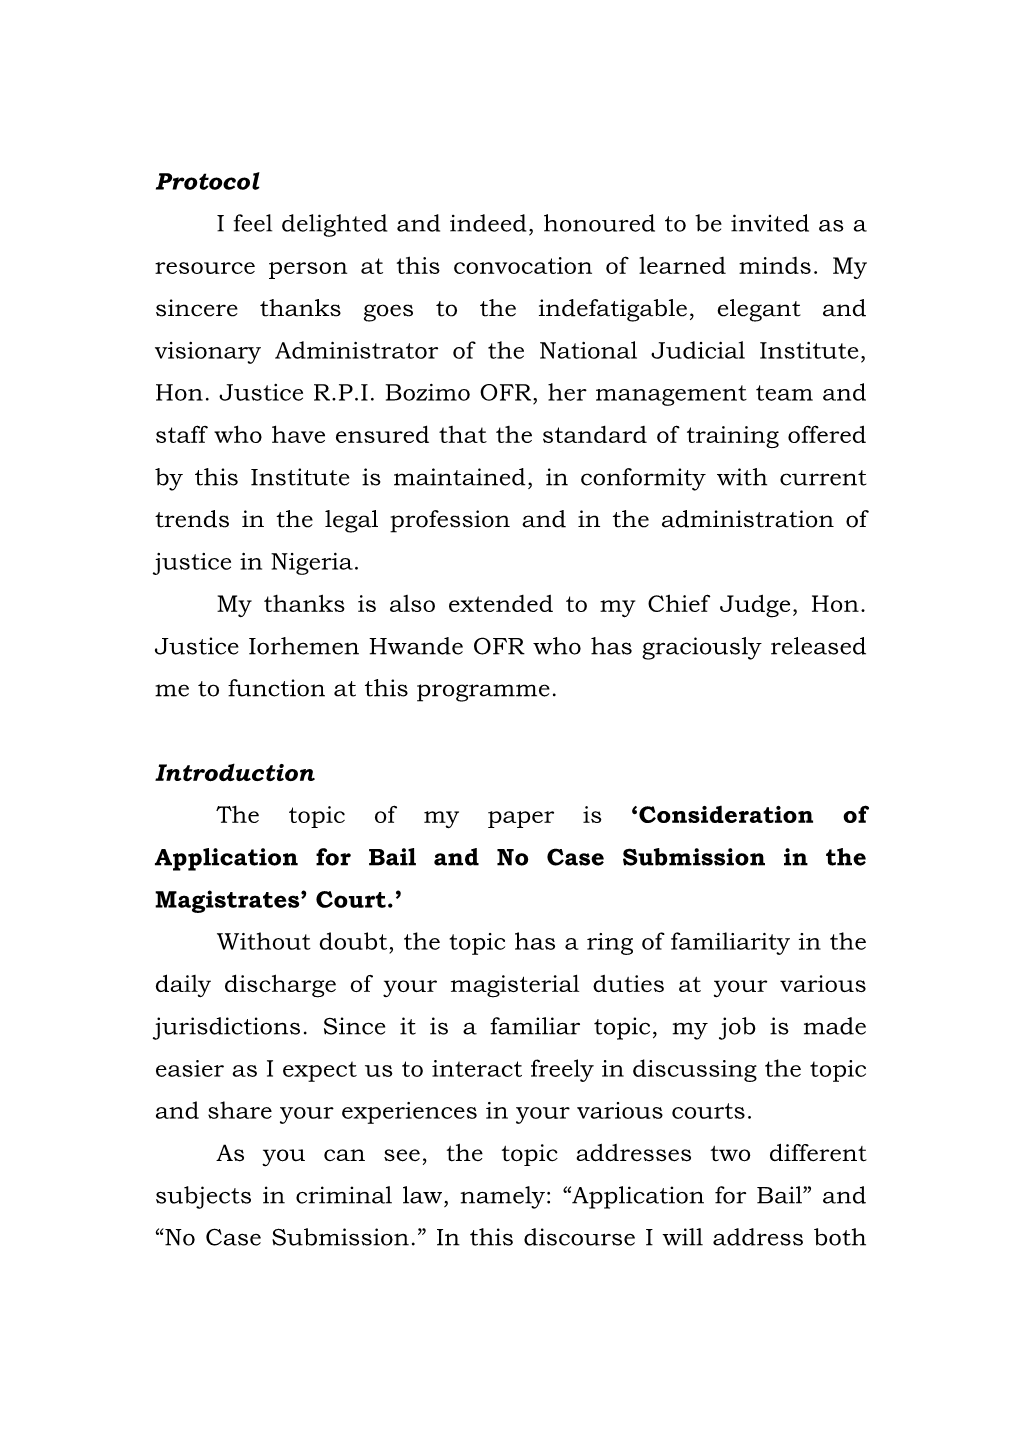 Consideration of Applications for Bail and No Case Submission in The